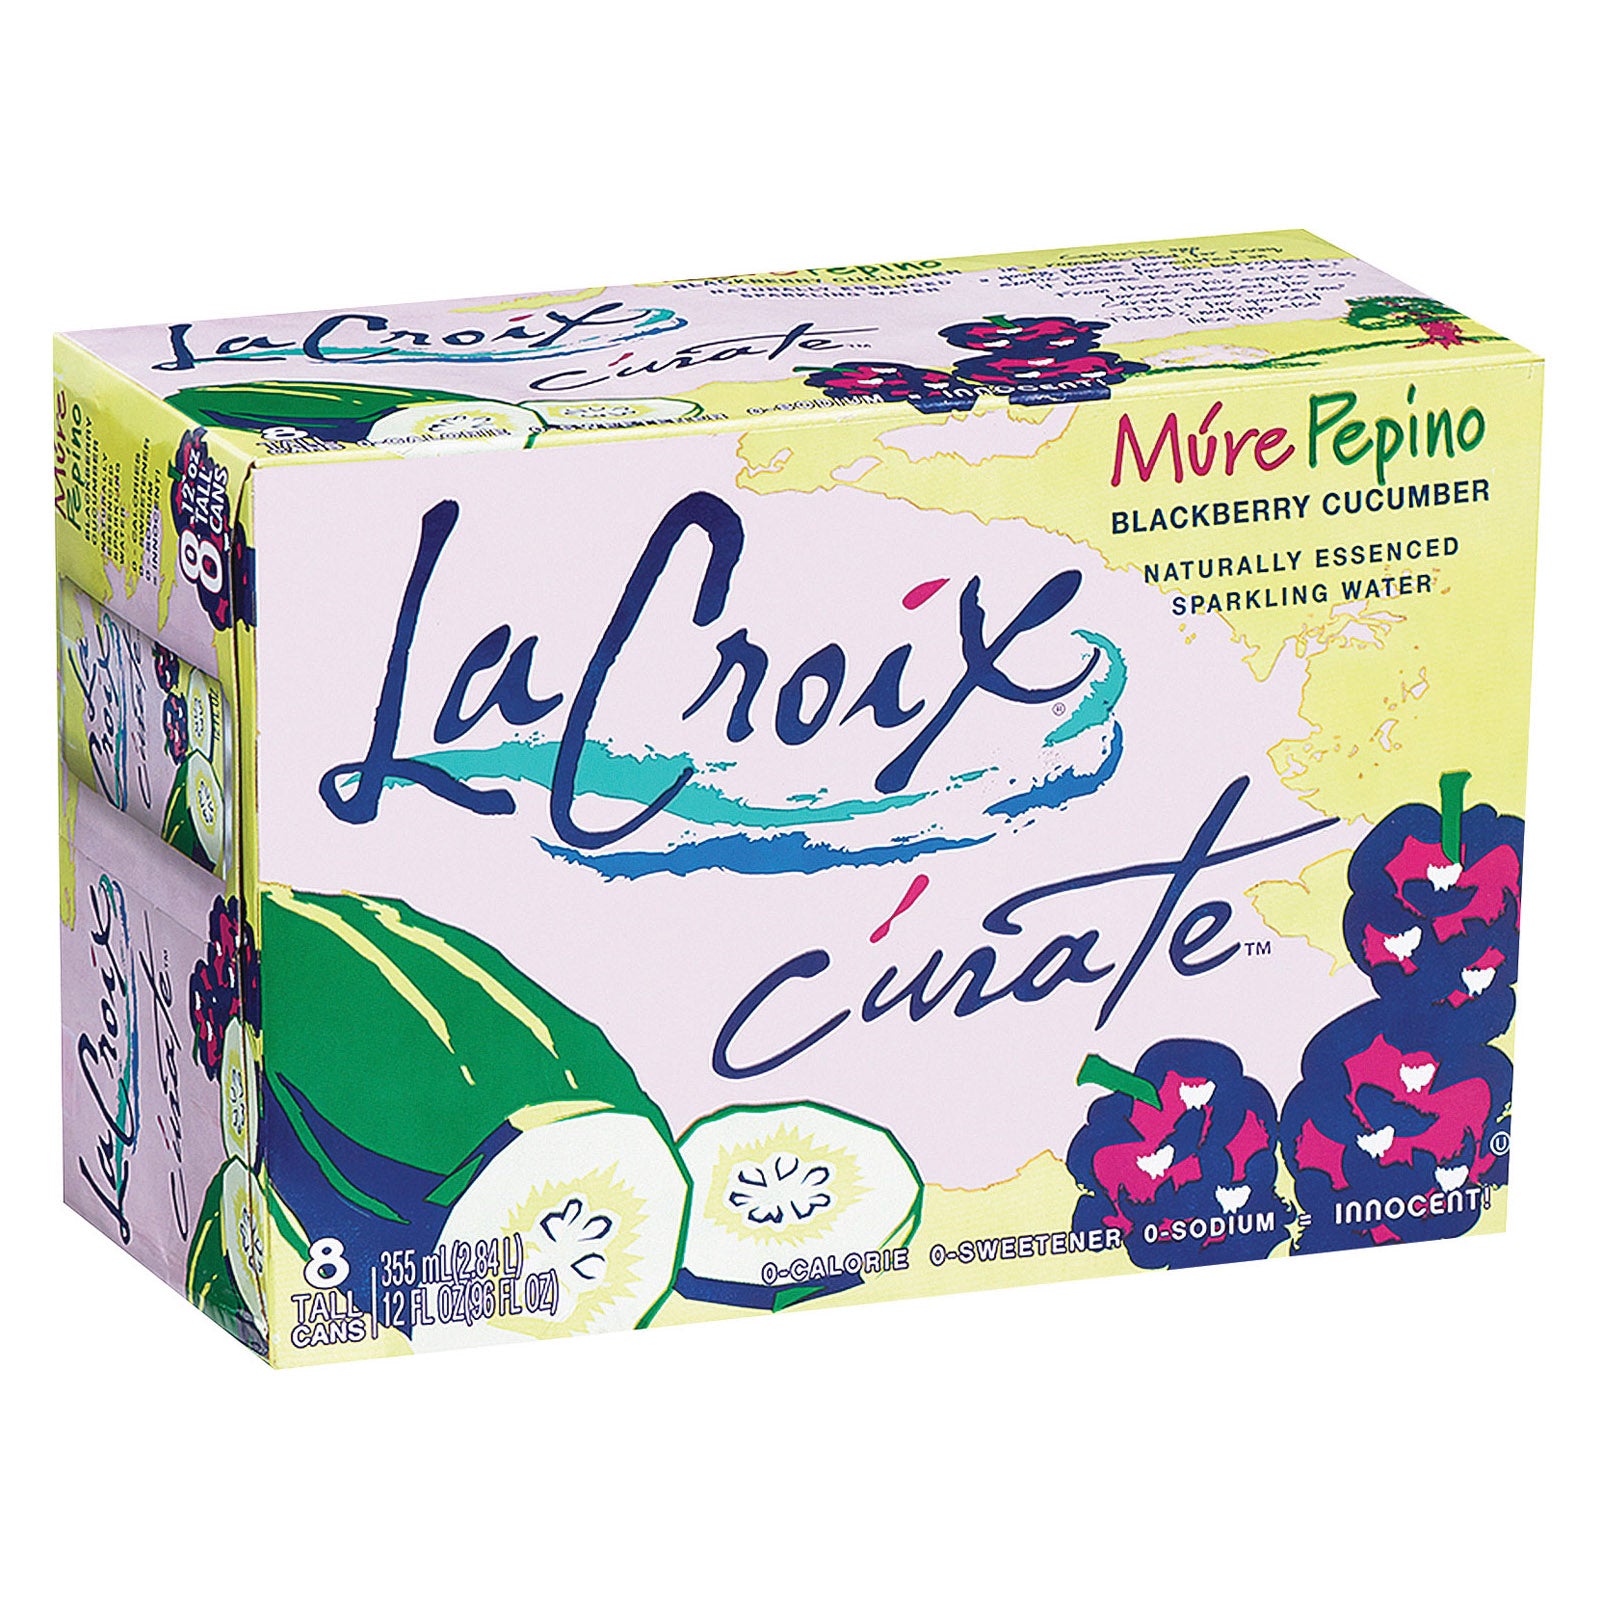 Lacroix Sparkling Water - Mure Pepino - Case Of 3 - 8-12 Fl Oz - Whole Green Foods